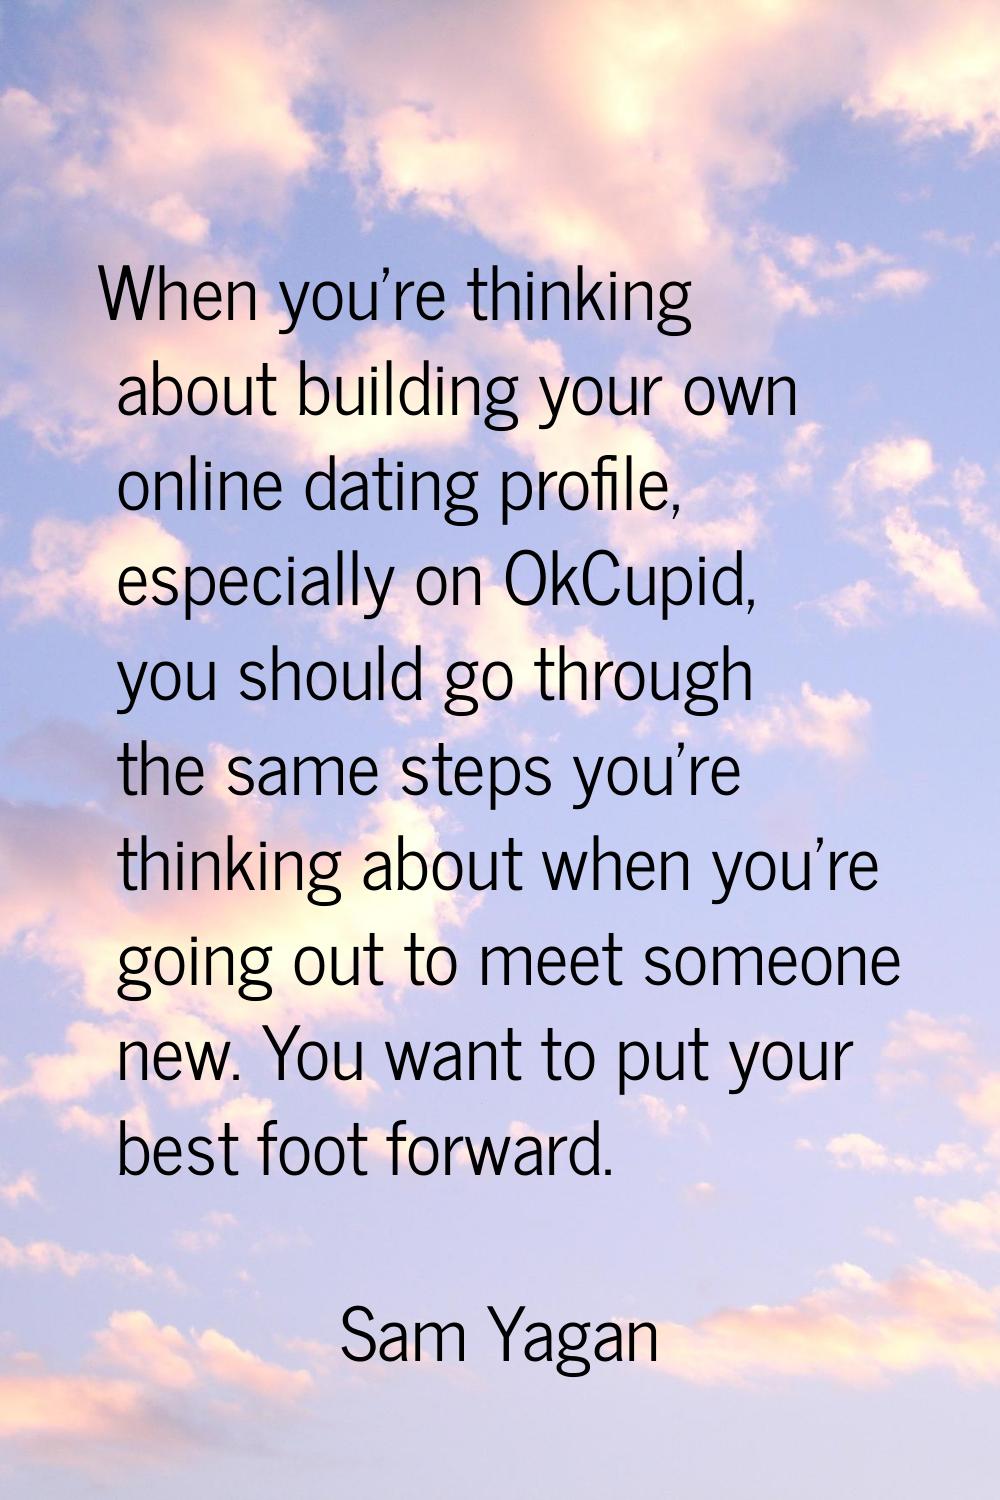 When you're thinking about building your own online dating profile, especially on OkCupid, you shou